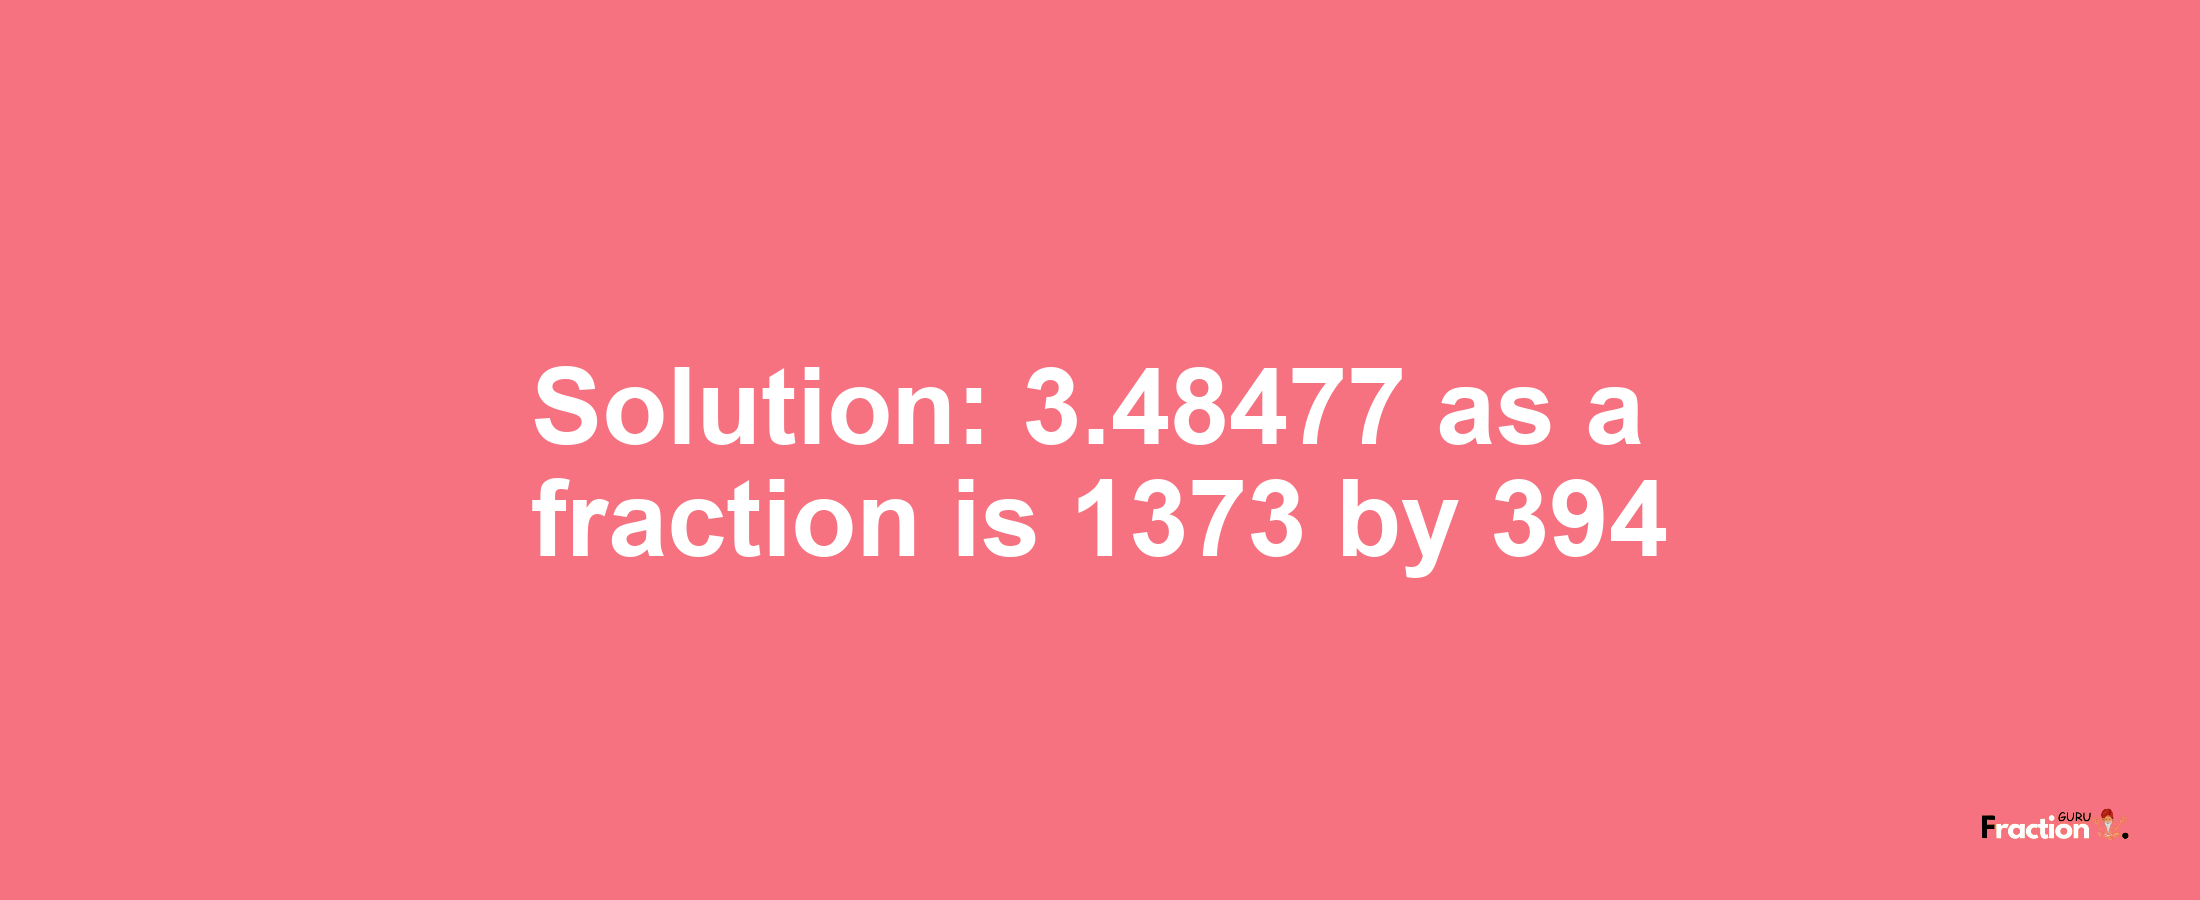 Solution:3.48477 as a fraction is 1373/394